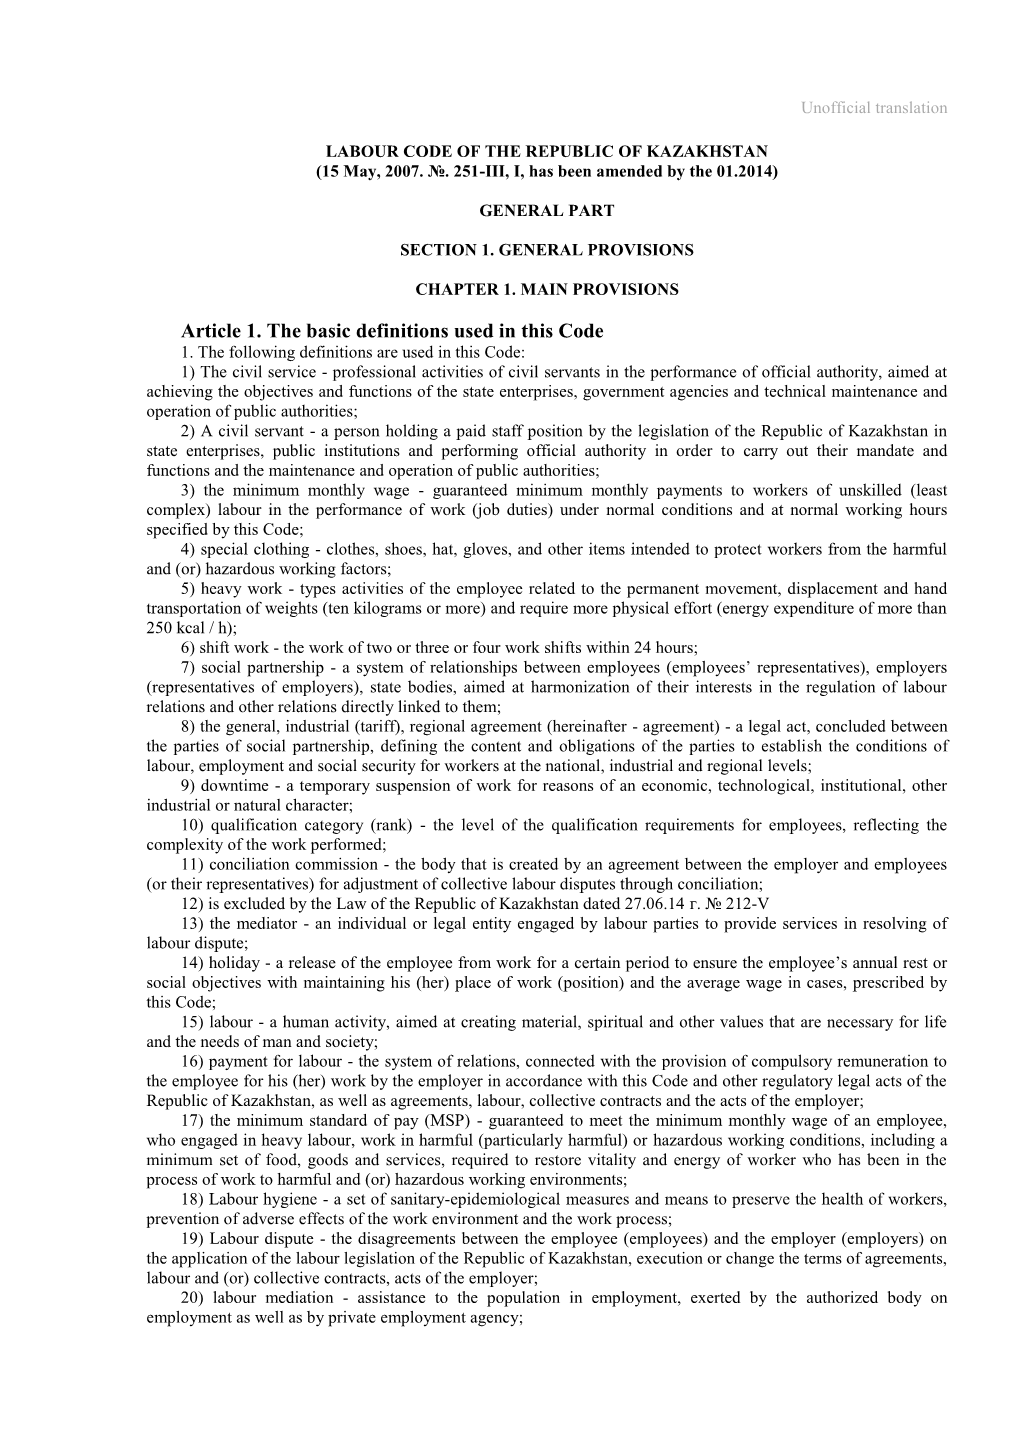 LABOUR CODE of the REPUBLIC of KAZAKHSTAN (15 May, 2007